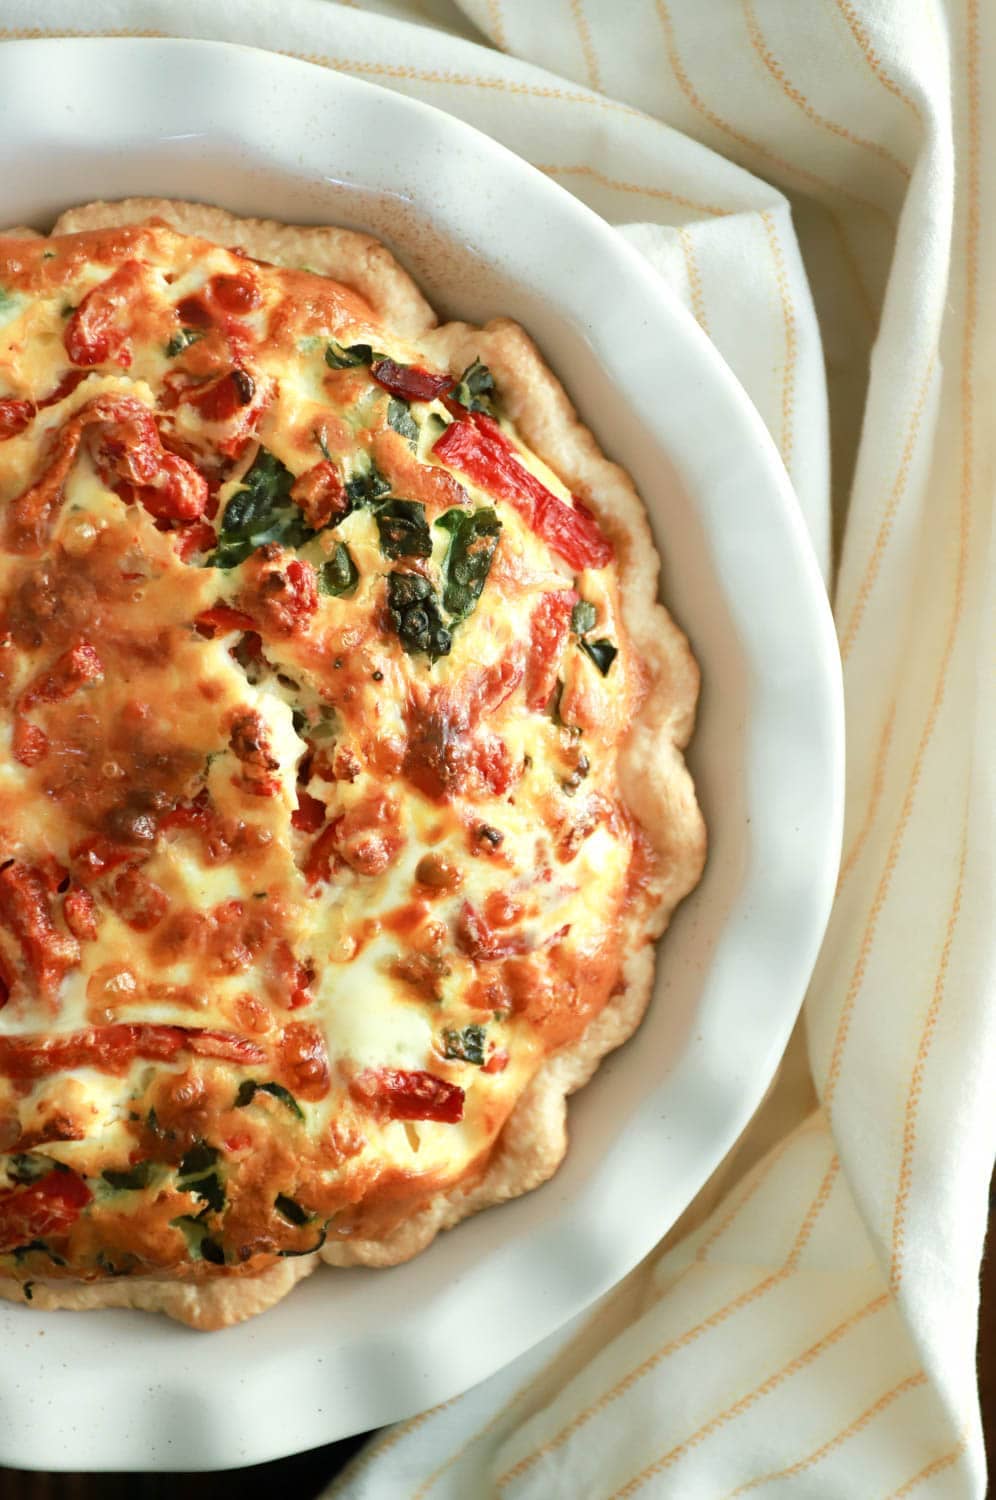 kale and red pepper quiche